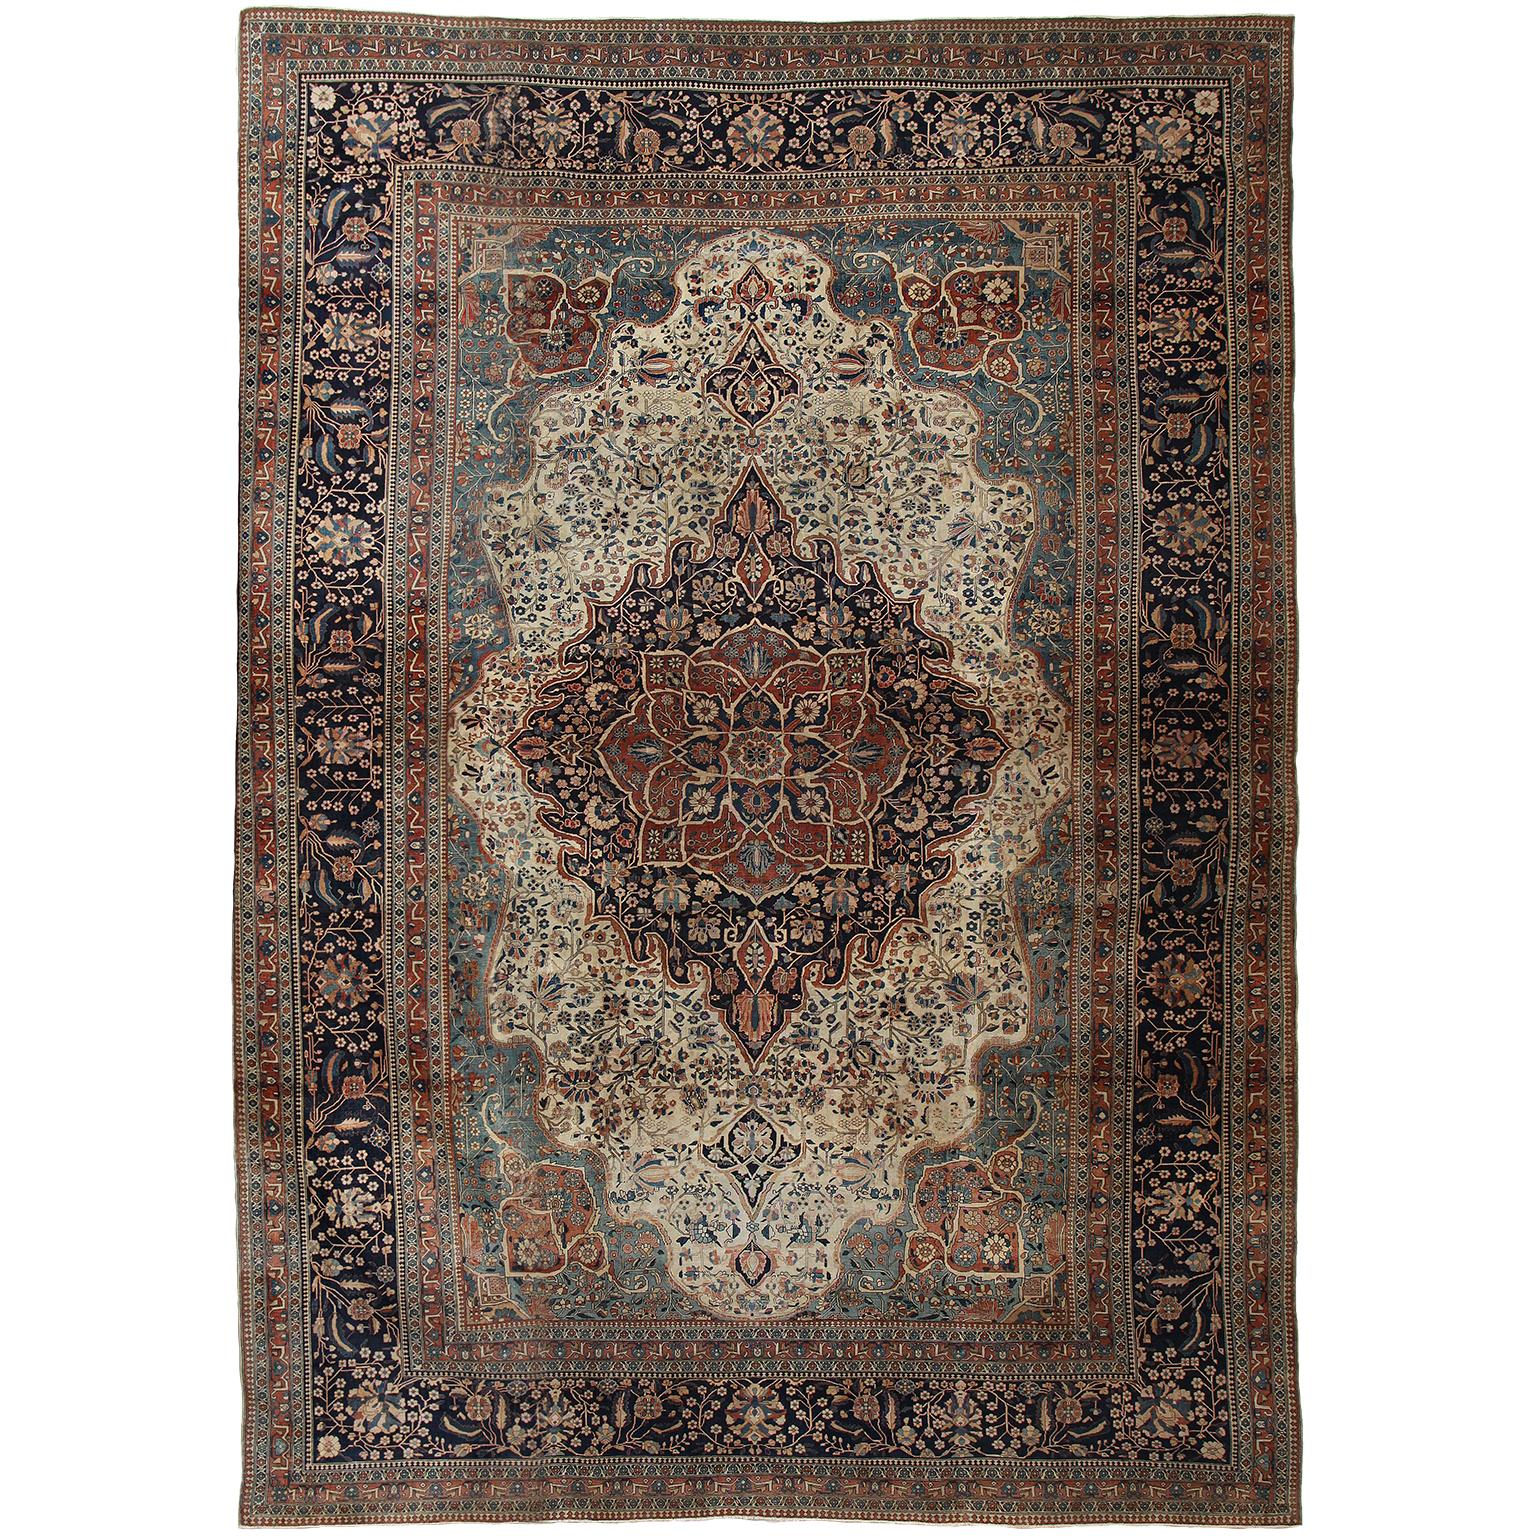 This wool Persian Kashan Mohtasham carpet circa 1870 is exceptionally fine and in excellent antique condition. It consists of a cotton warp and thread, hand-knotted wool pile and natural vegetable dyes. Its intricate medallion, field and border are